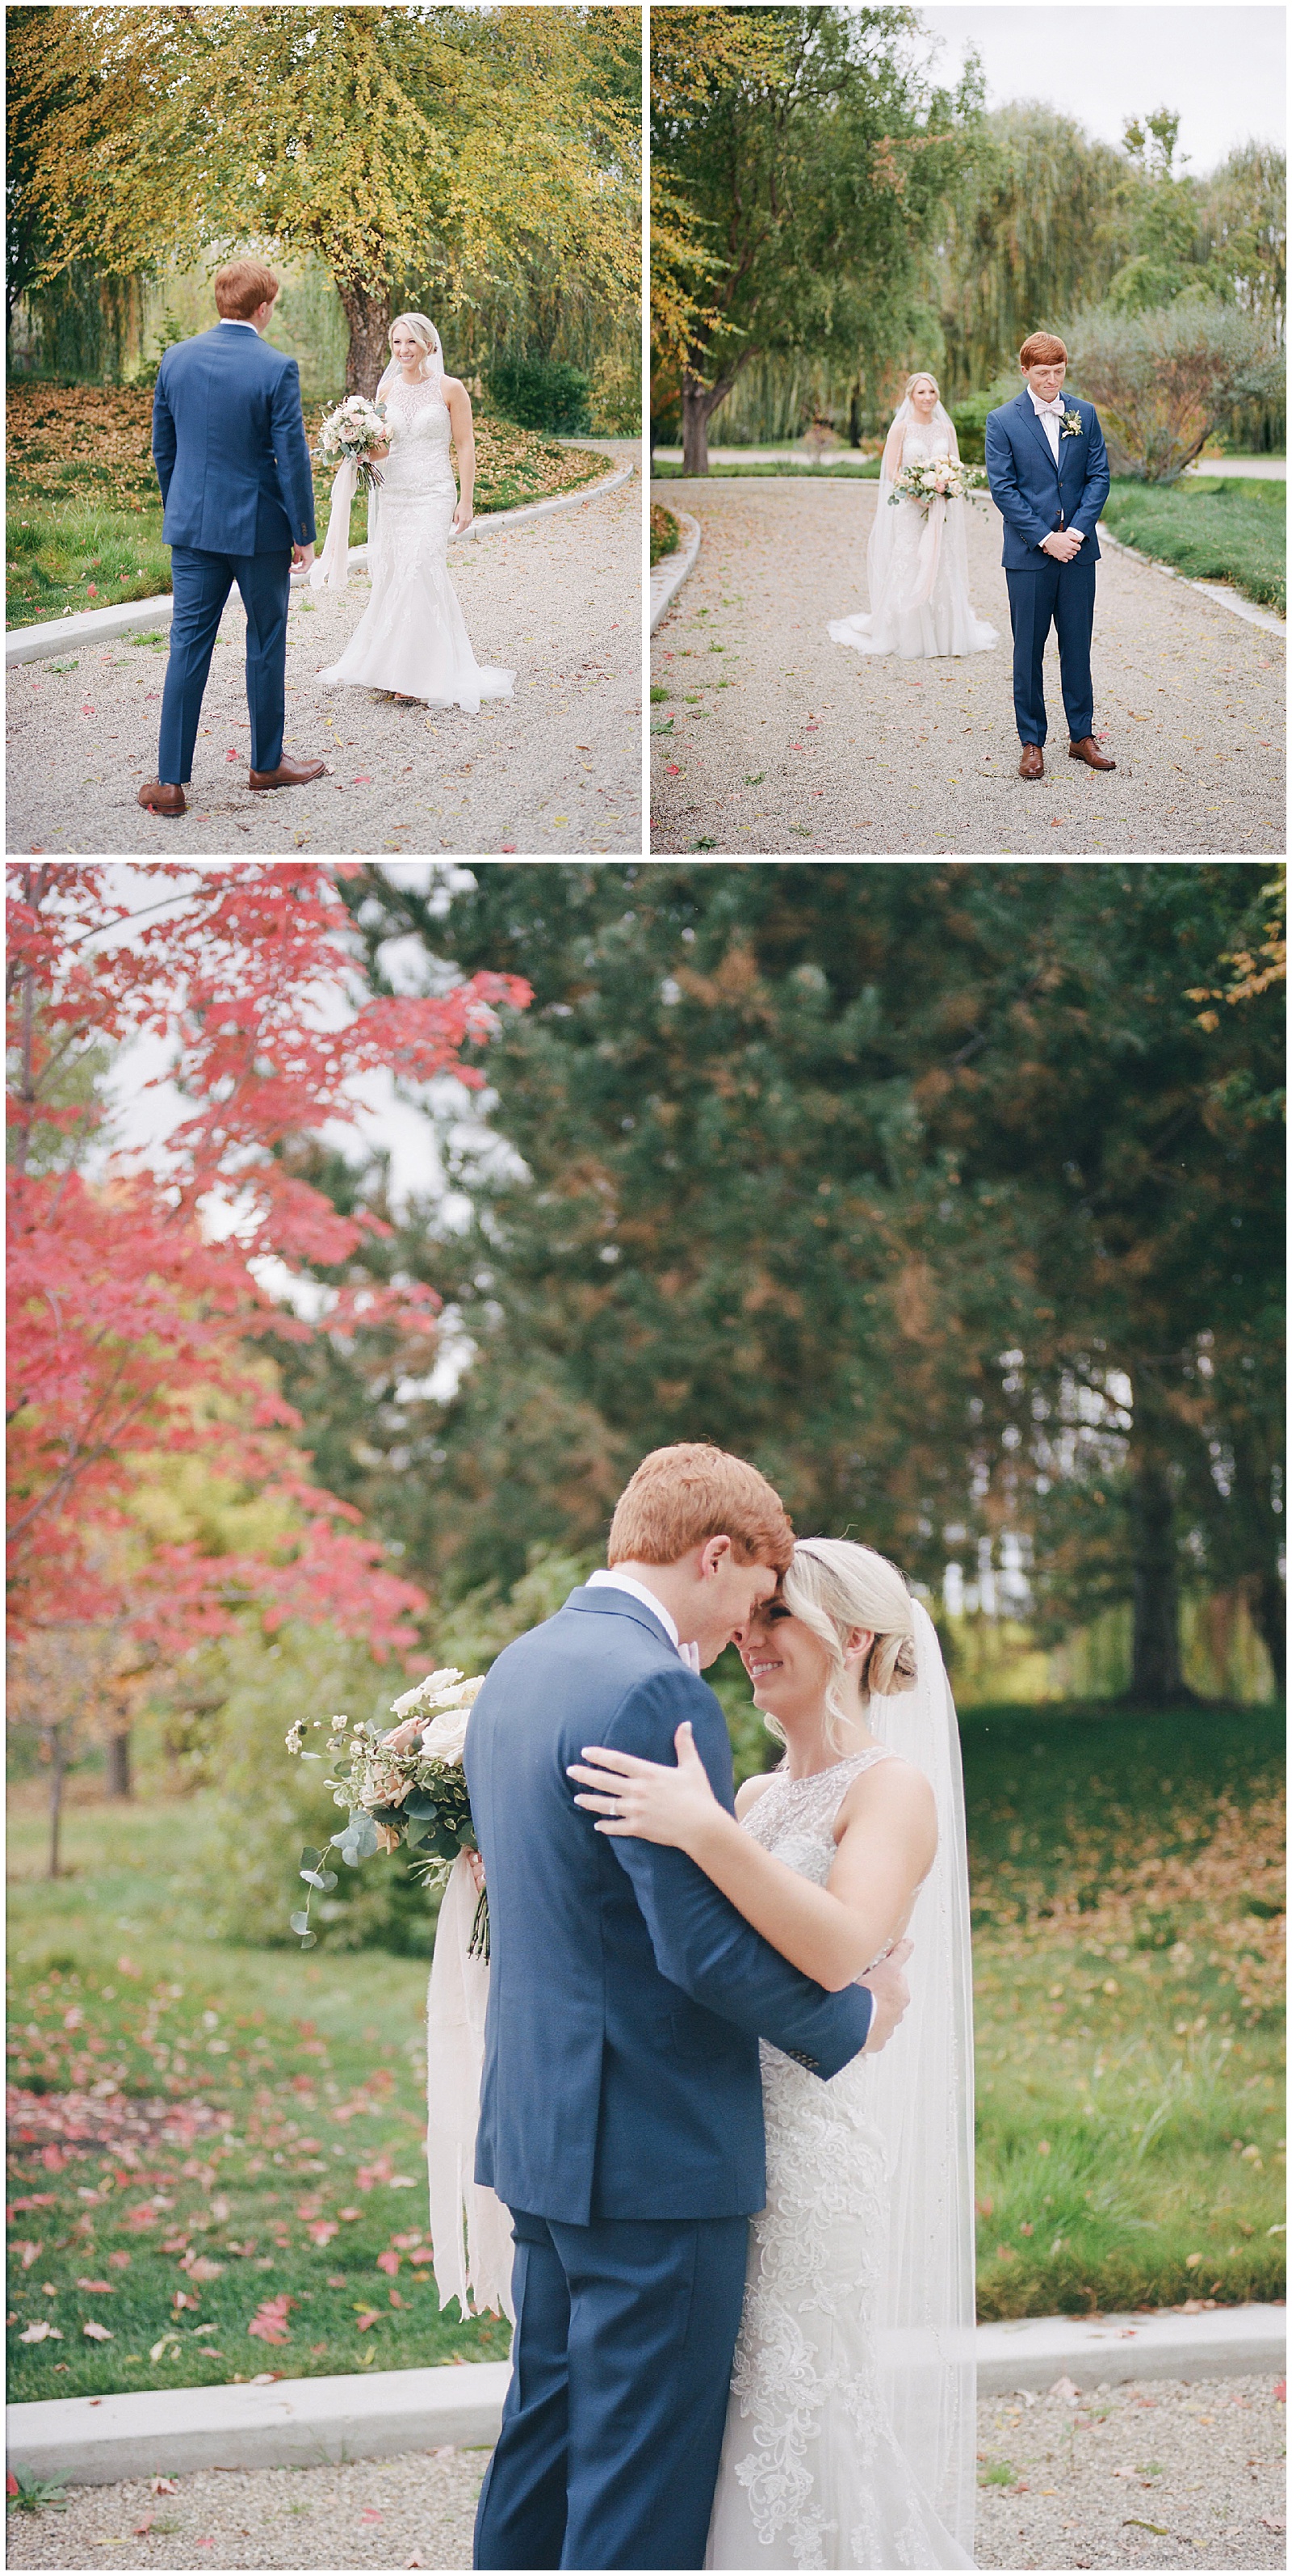 10 Things I learned from our Wedding Day - Karli Elliott Photography